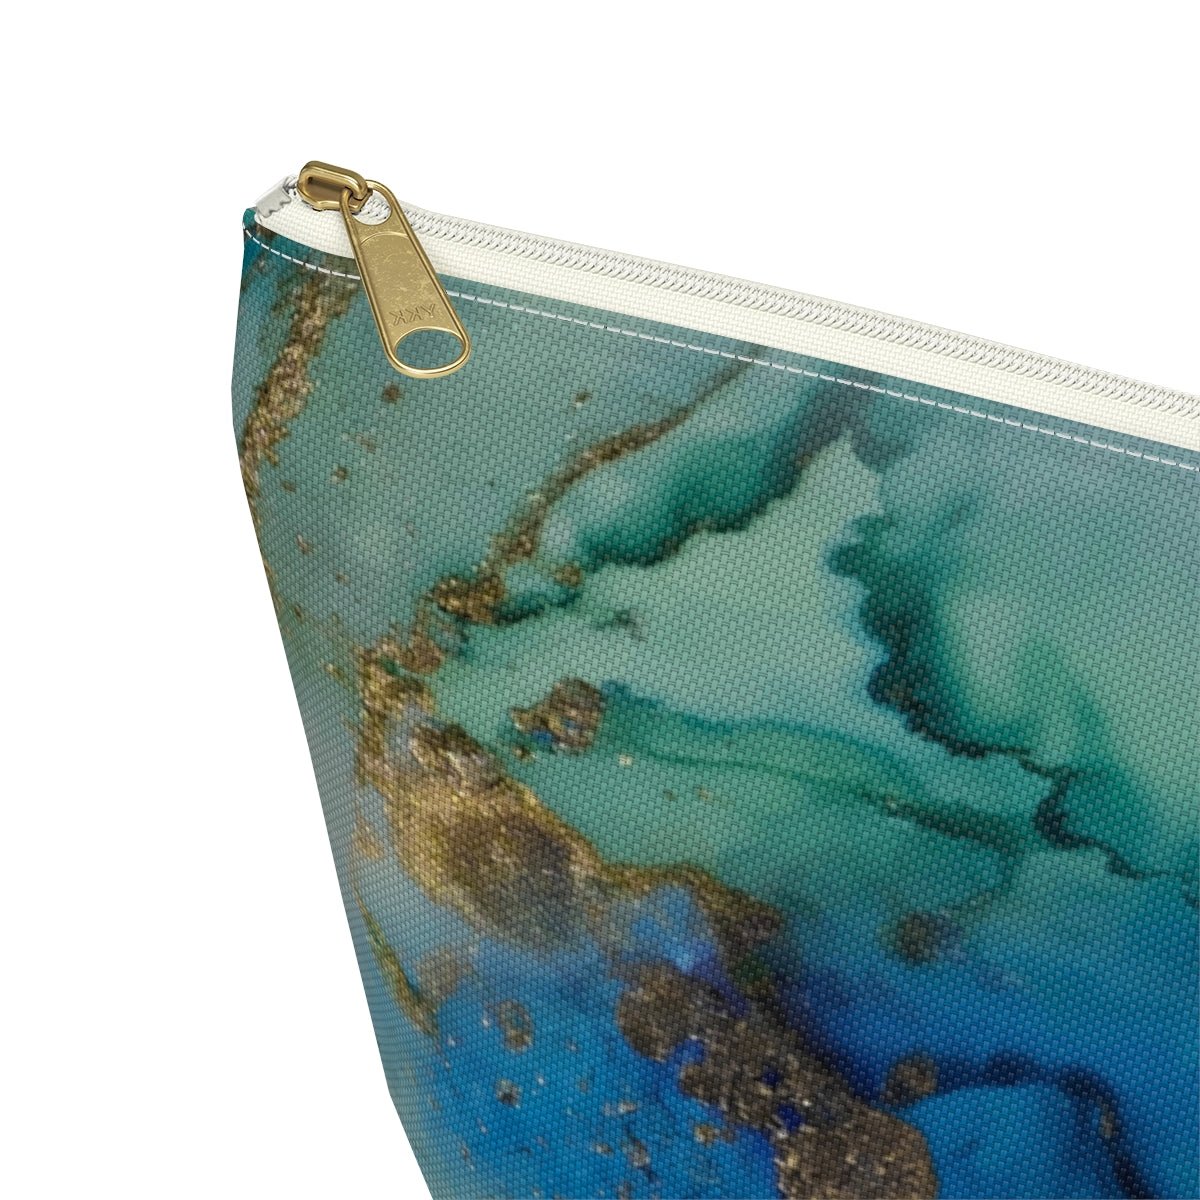 Gold and Blue Marble Accessory Pouch w T-bottom - Puffin Lime